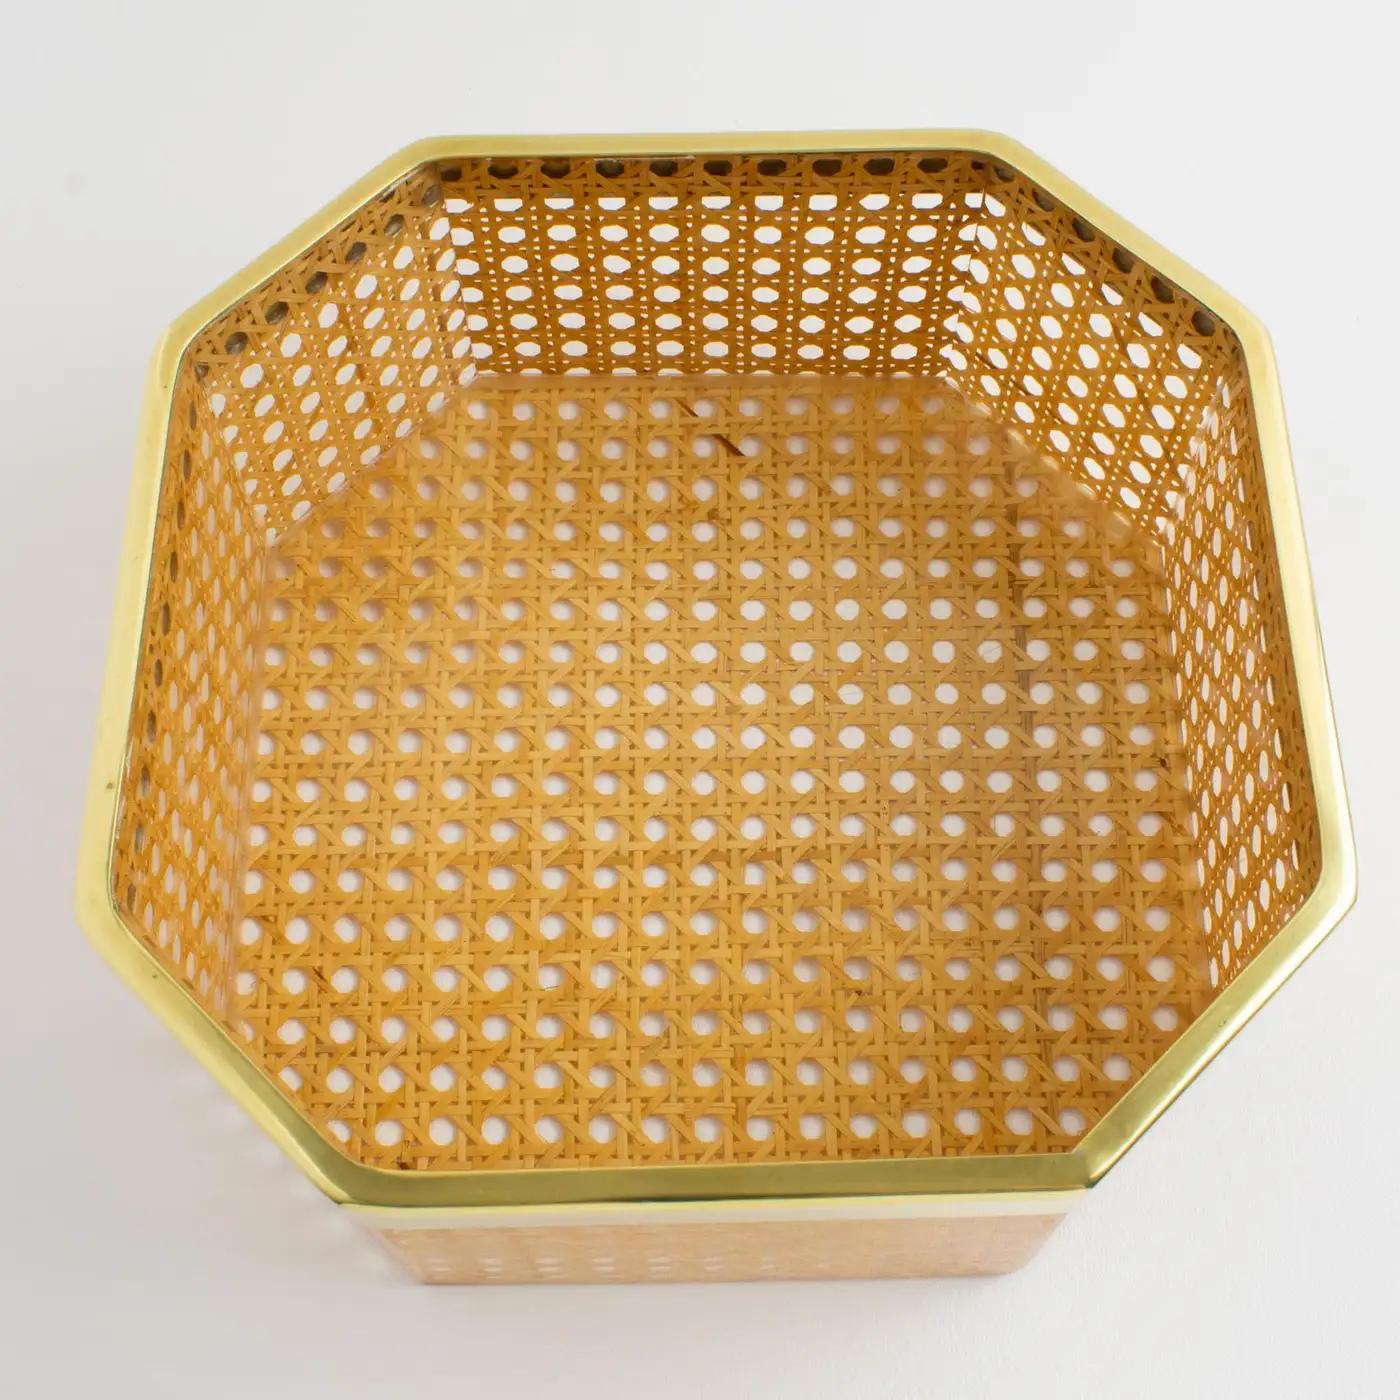 Late 20th Century Christian Dior Home Lucite and Rattan Basket Bowl Centerpiece, 1970s For Sale